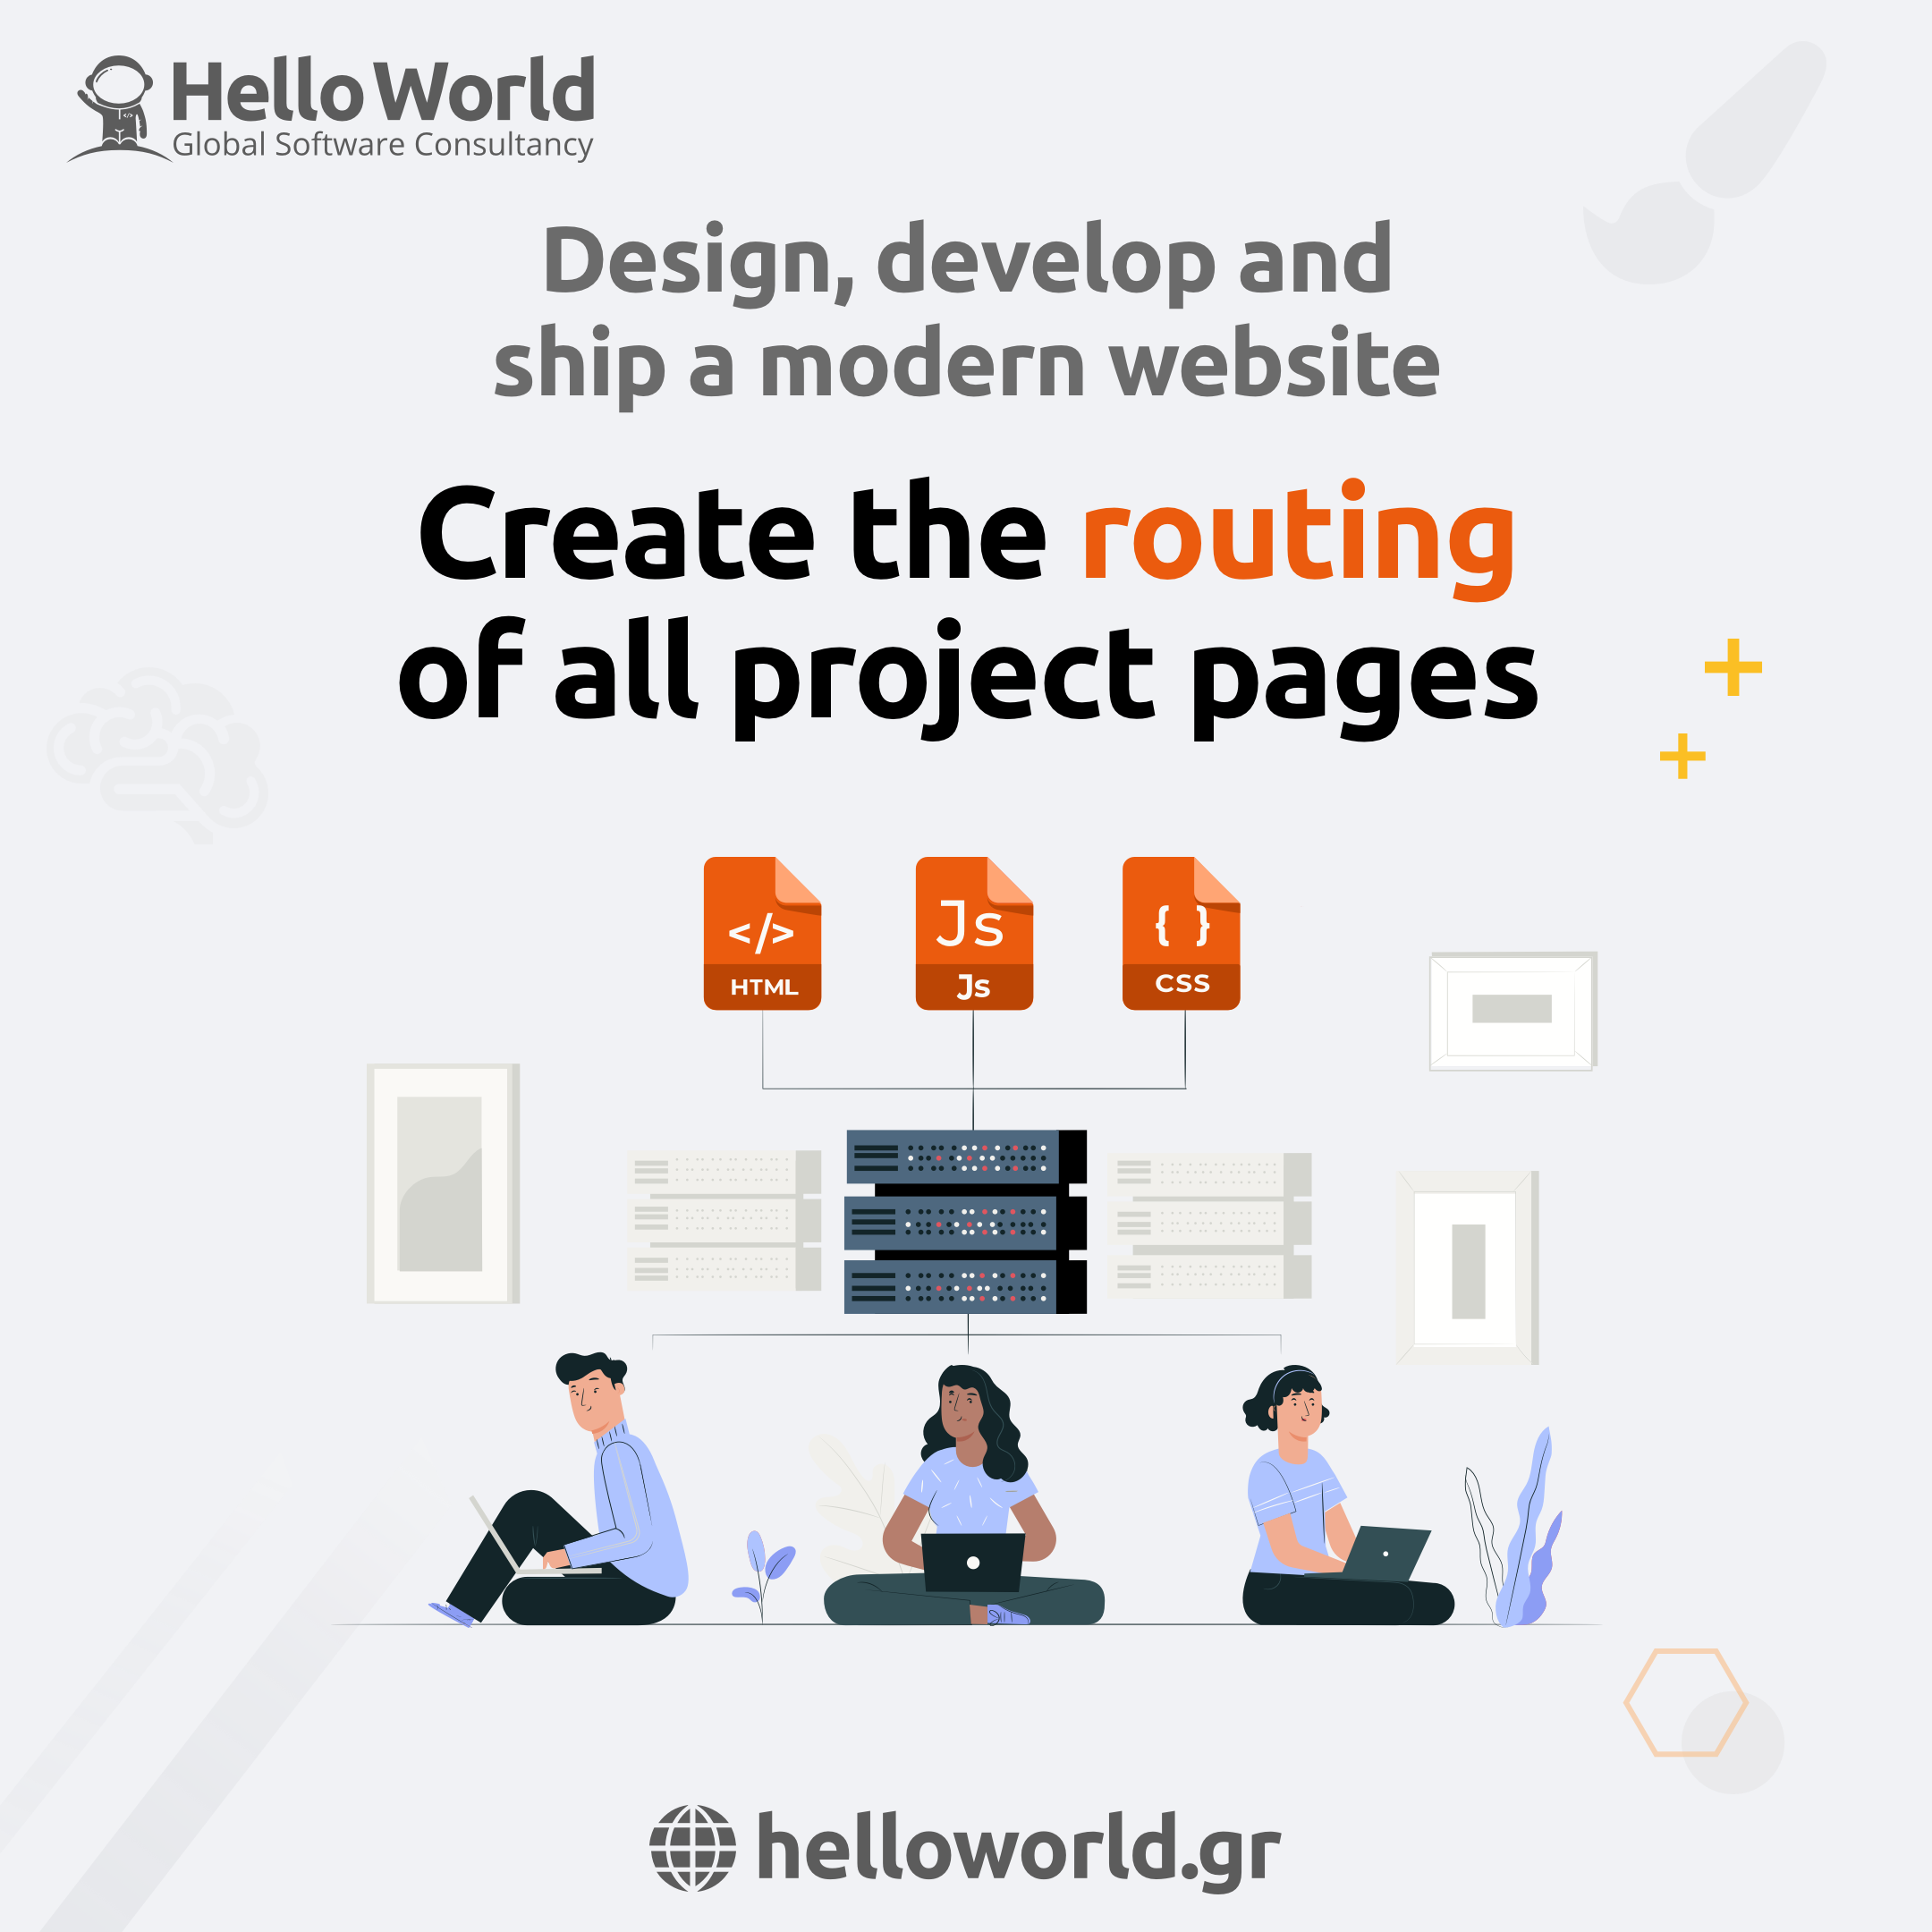 Create a Modern Website: Create the routing of all project pages